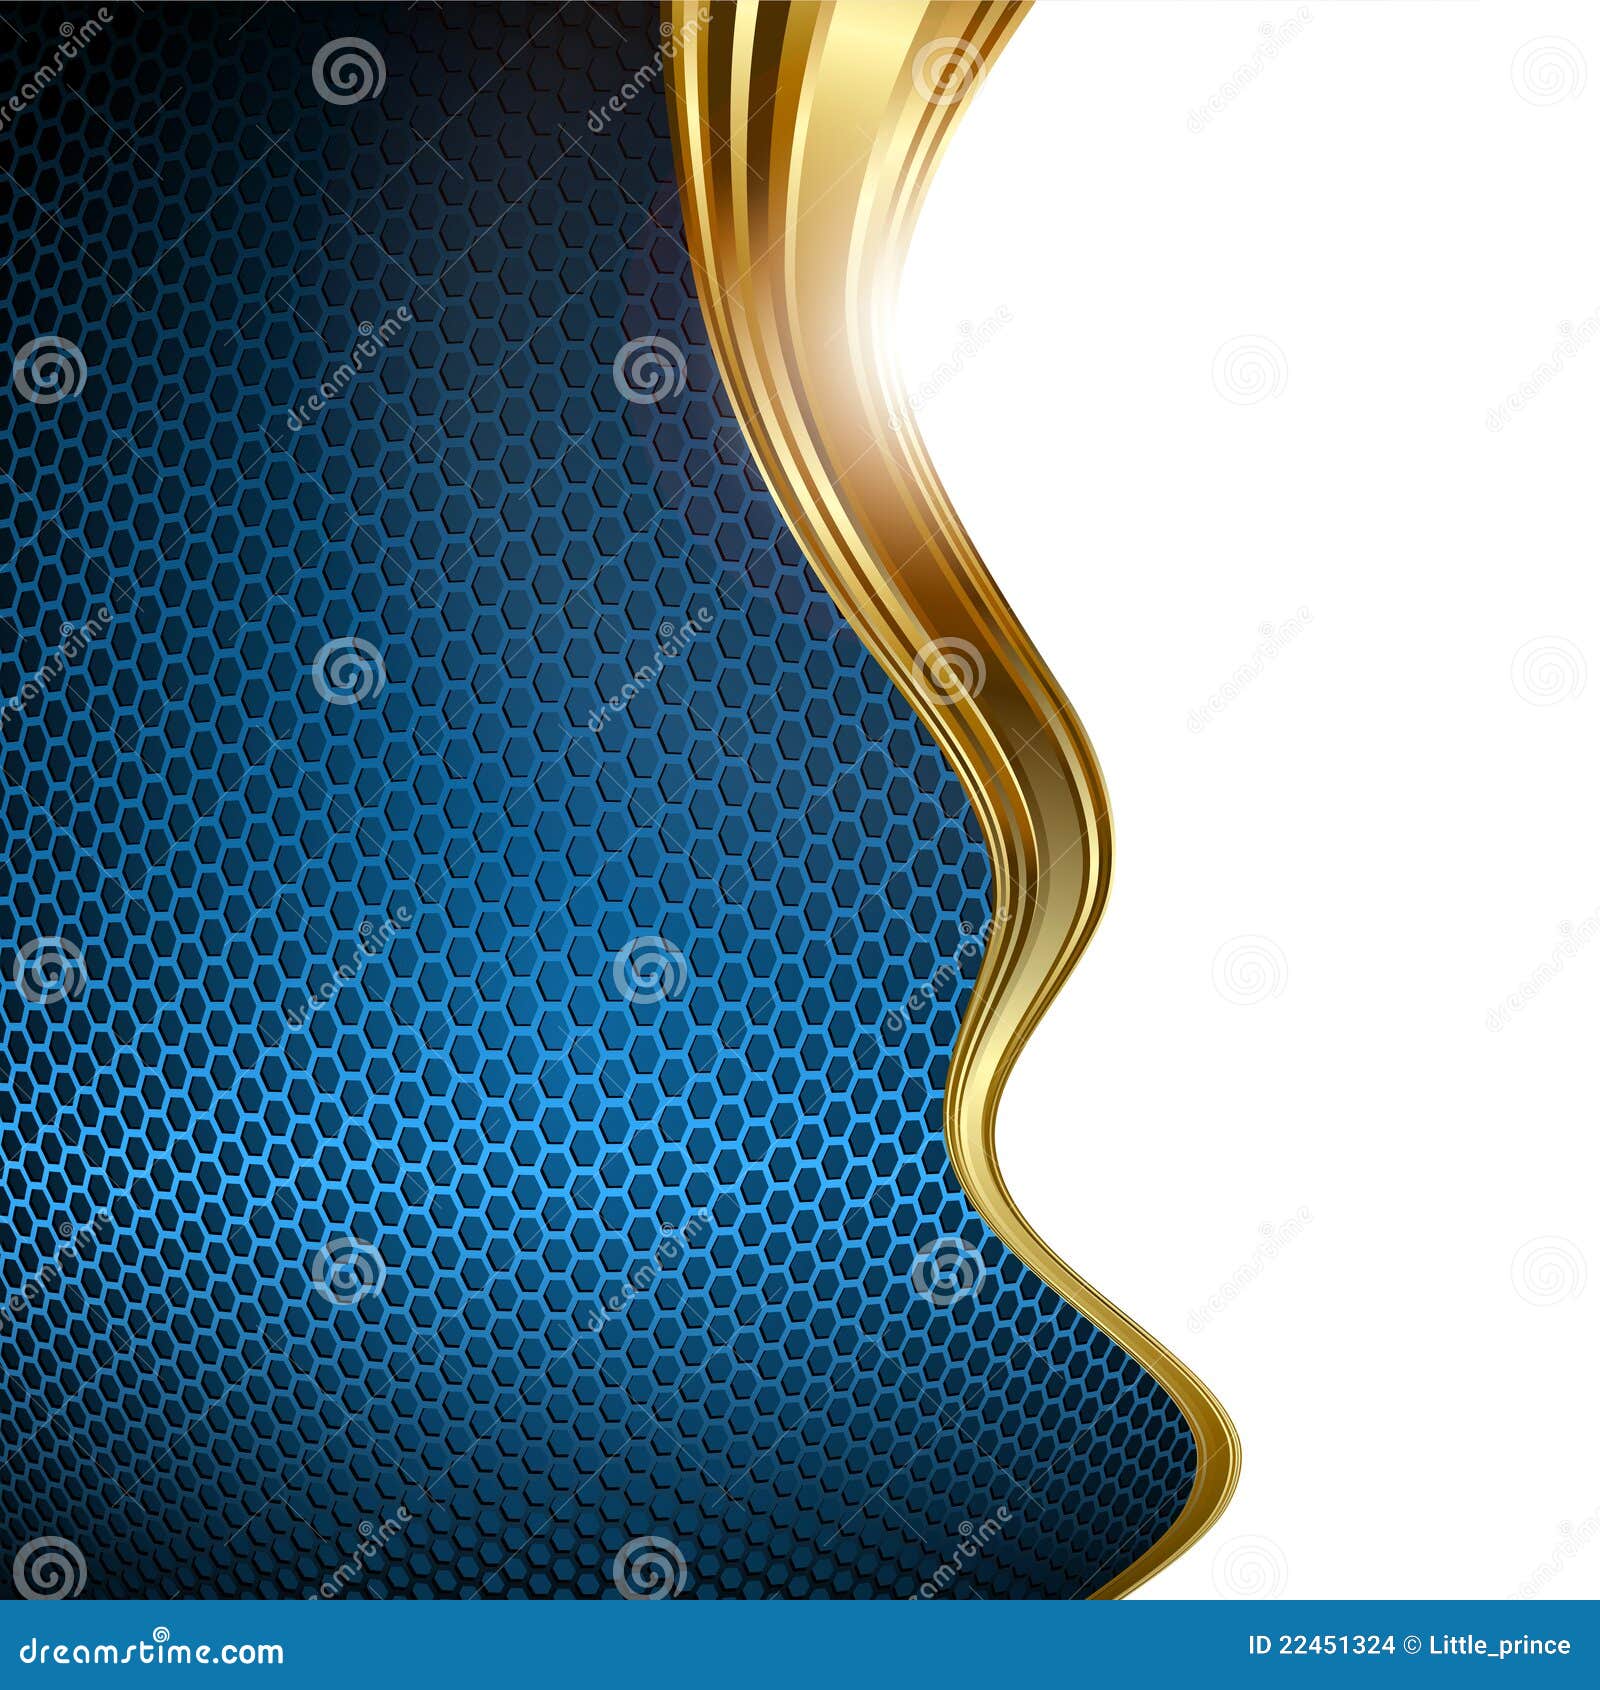 Blue And Gold Abstract Background Stock Images - Image: 22451324